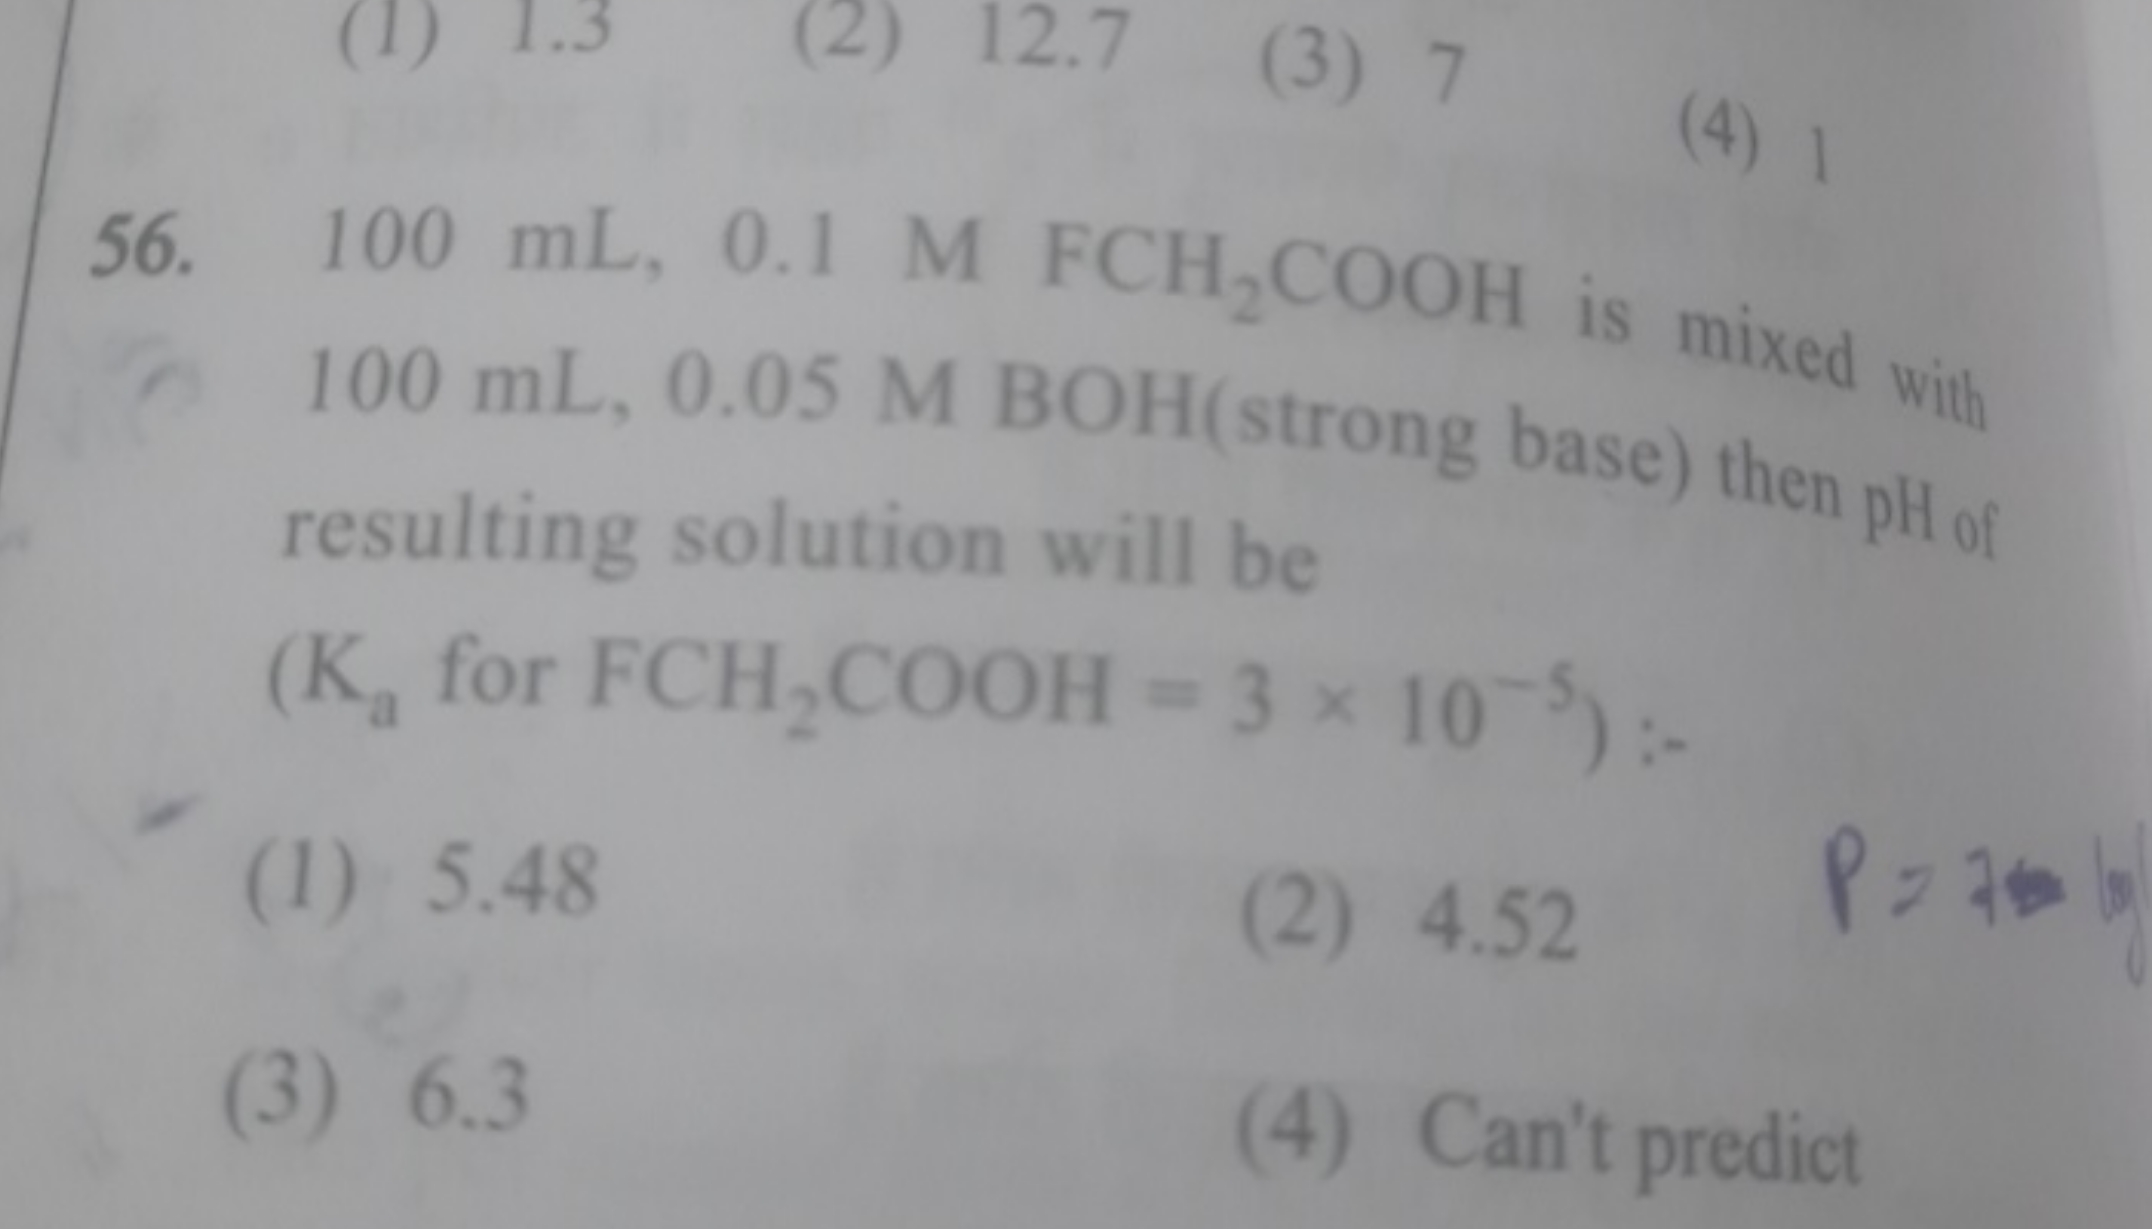 100 mL,0.1MFCHFOOH2​ is mixed with 100 mL,0.05MBOH (strong base) then 